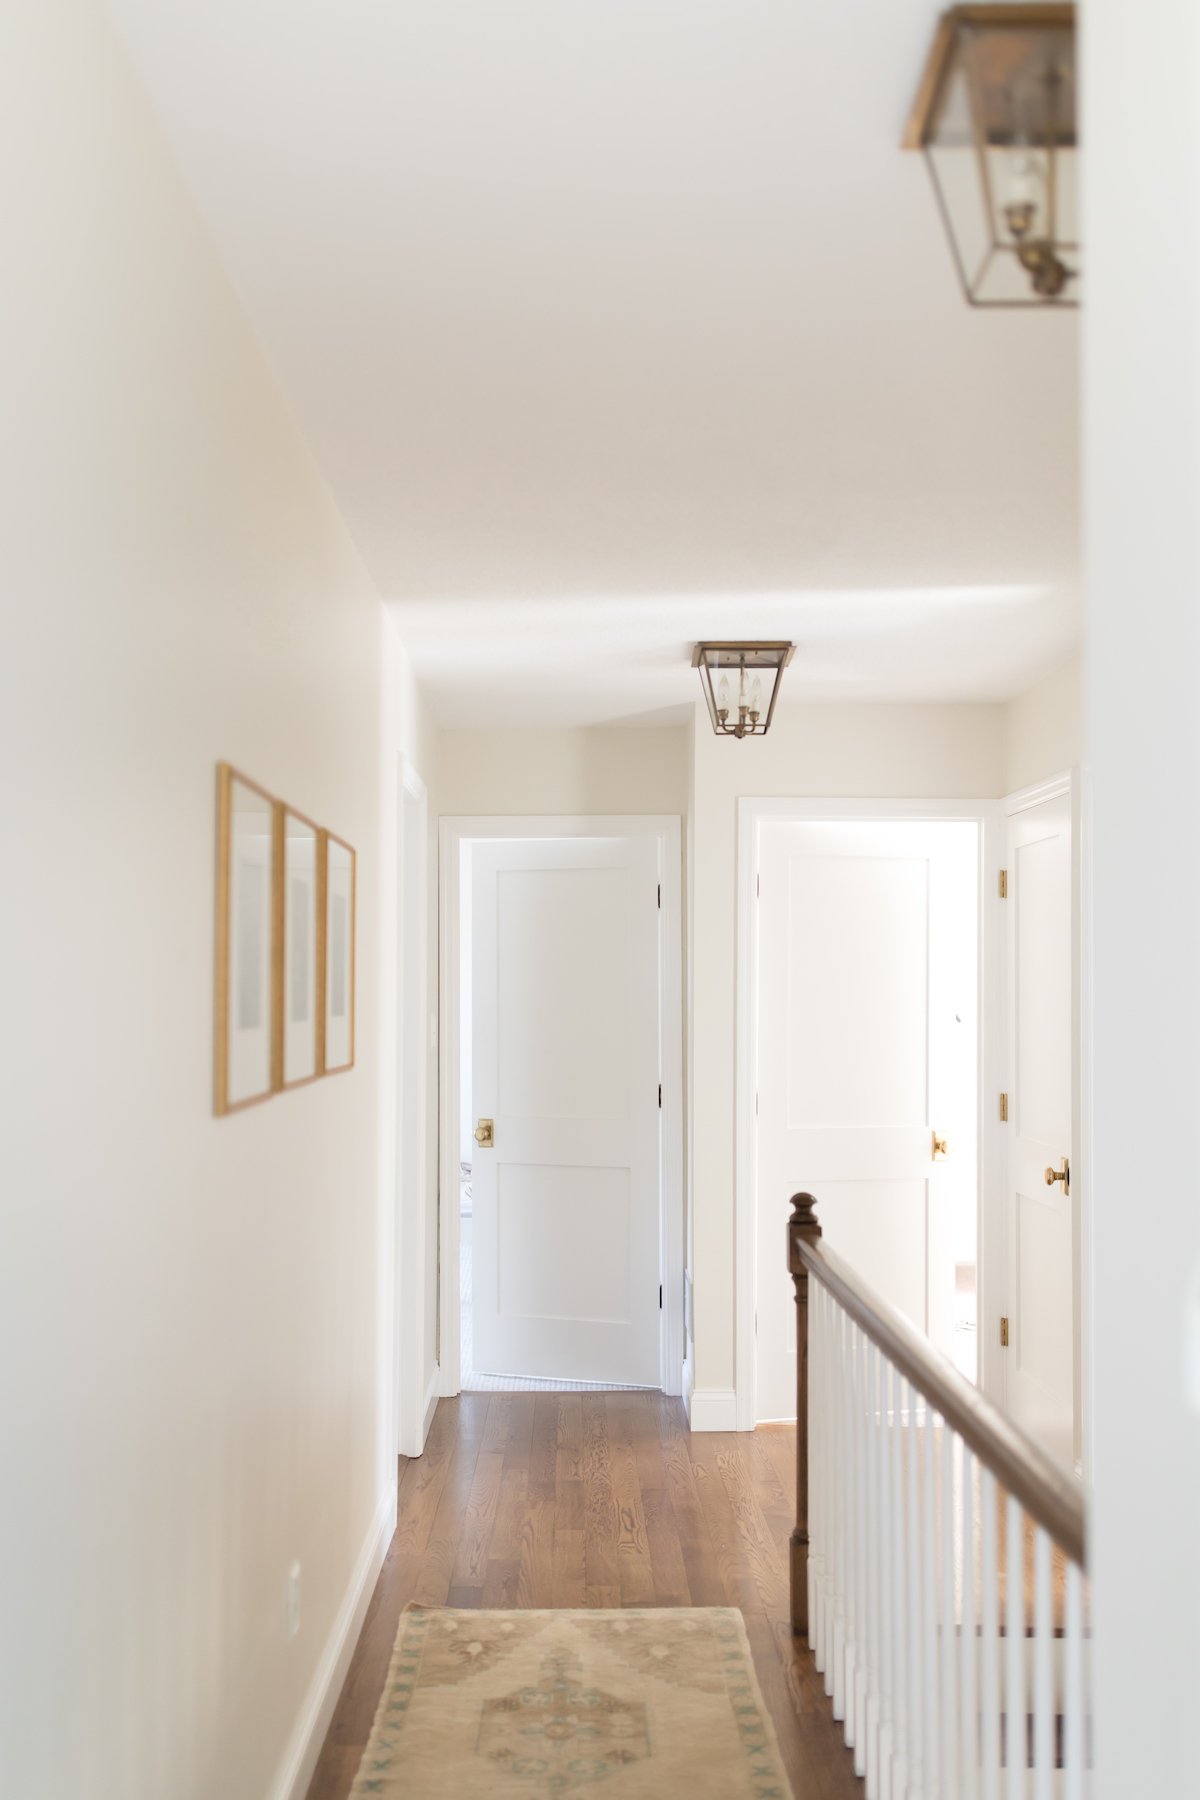 A hallway in a home with white walls and shaker style doors.